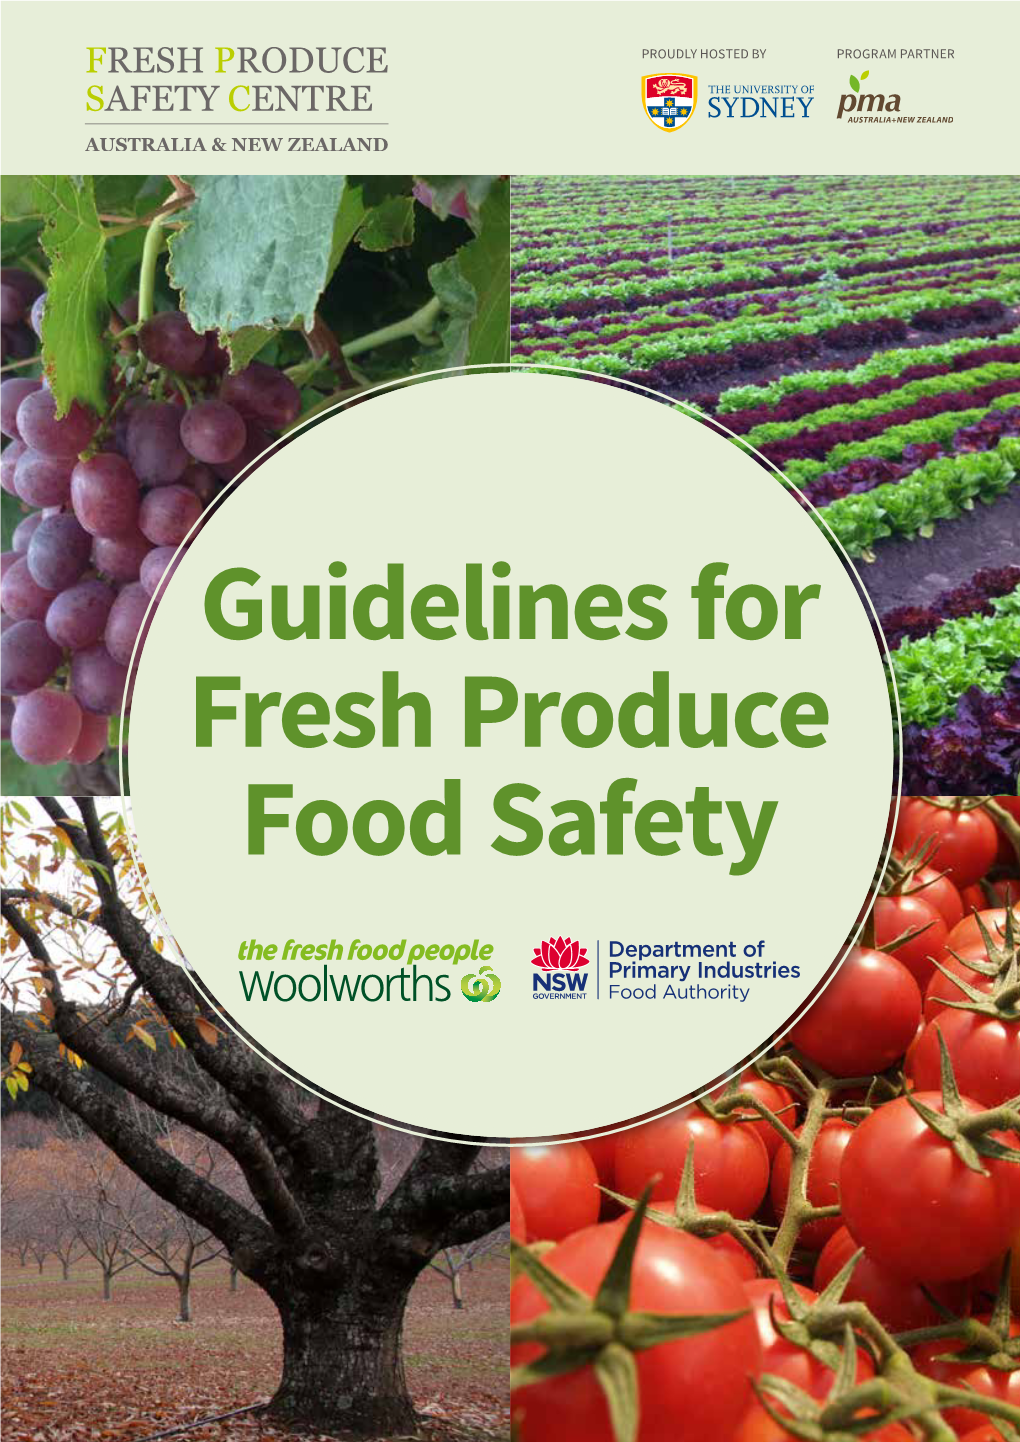 Guidelines for Fresh Produce Food Safety Guidelines Proudly Sponsored By